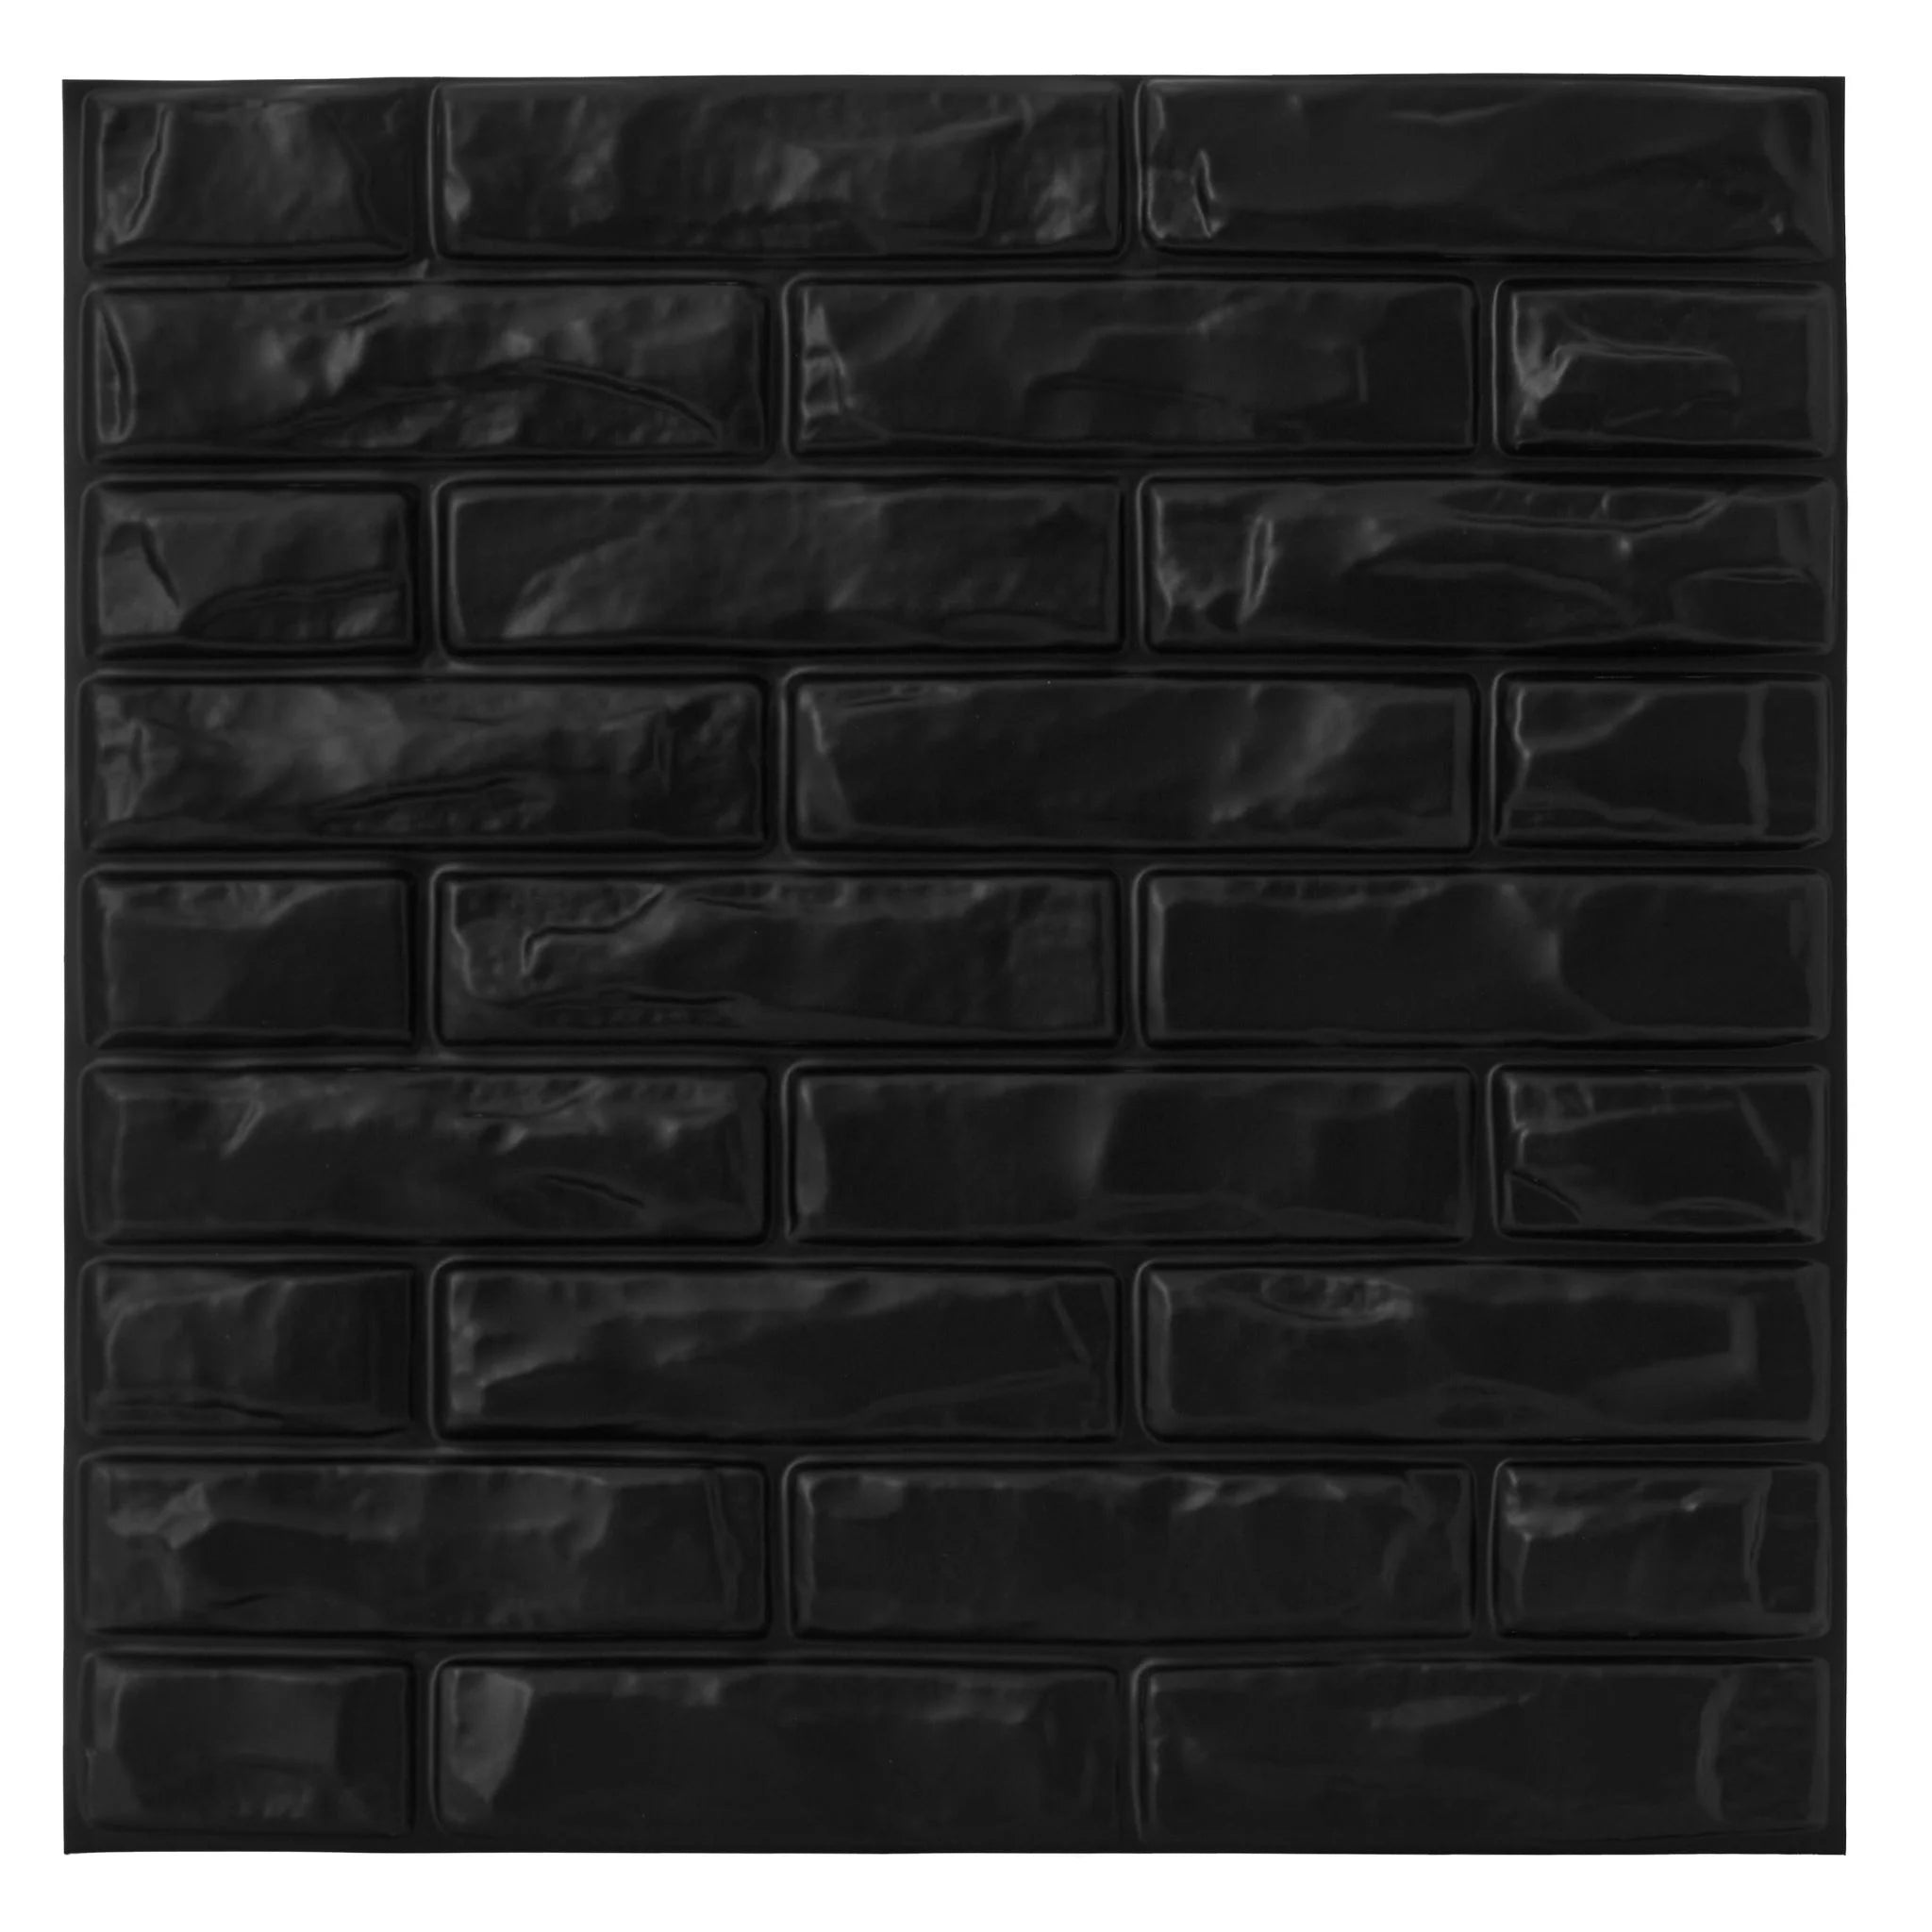 Black PVC wall panel with brick patterns, close-up view